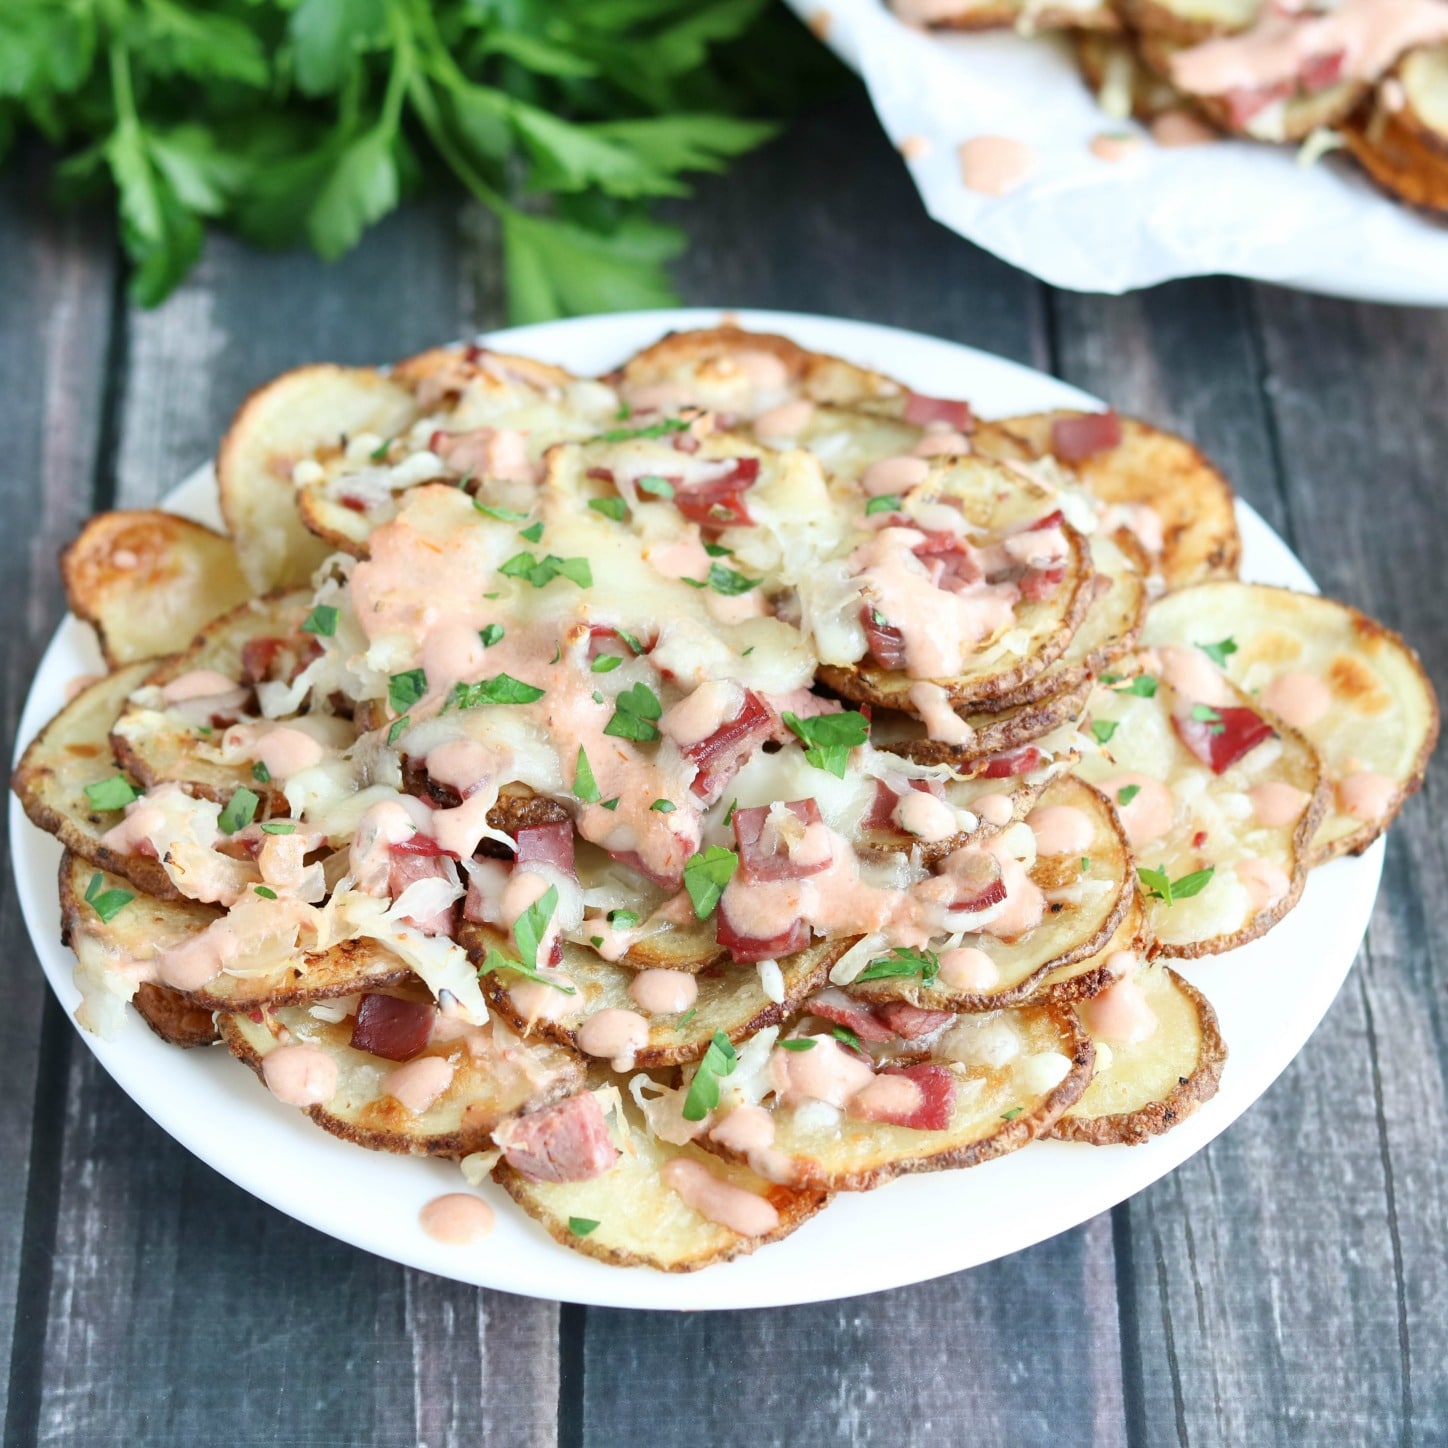 These Reuben-Topped Irish Nachos feature seasoned, oven-baked potato chips, plus delicious toppings loaded with the ever-popular flavors of a reuben sandwich! Easy to make, seriously delicious! | www.TwoHealthyKitchens.com